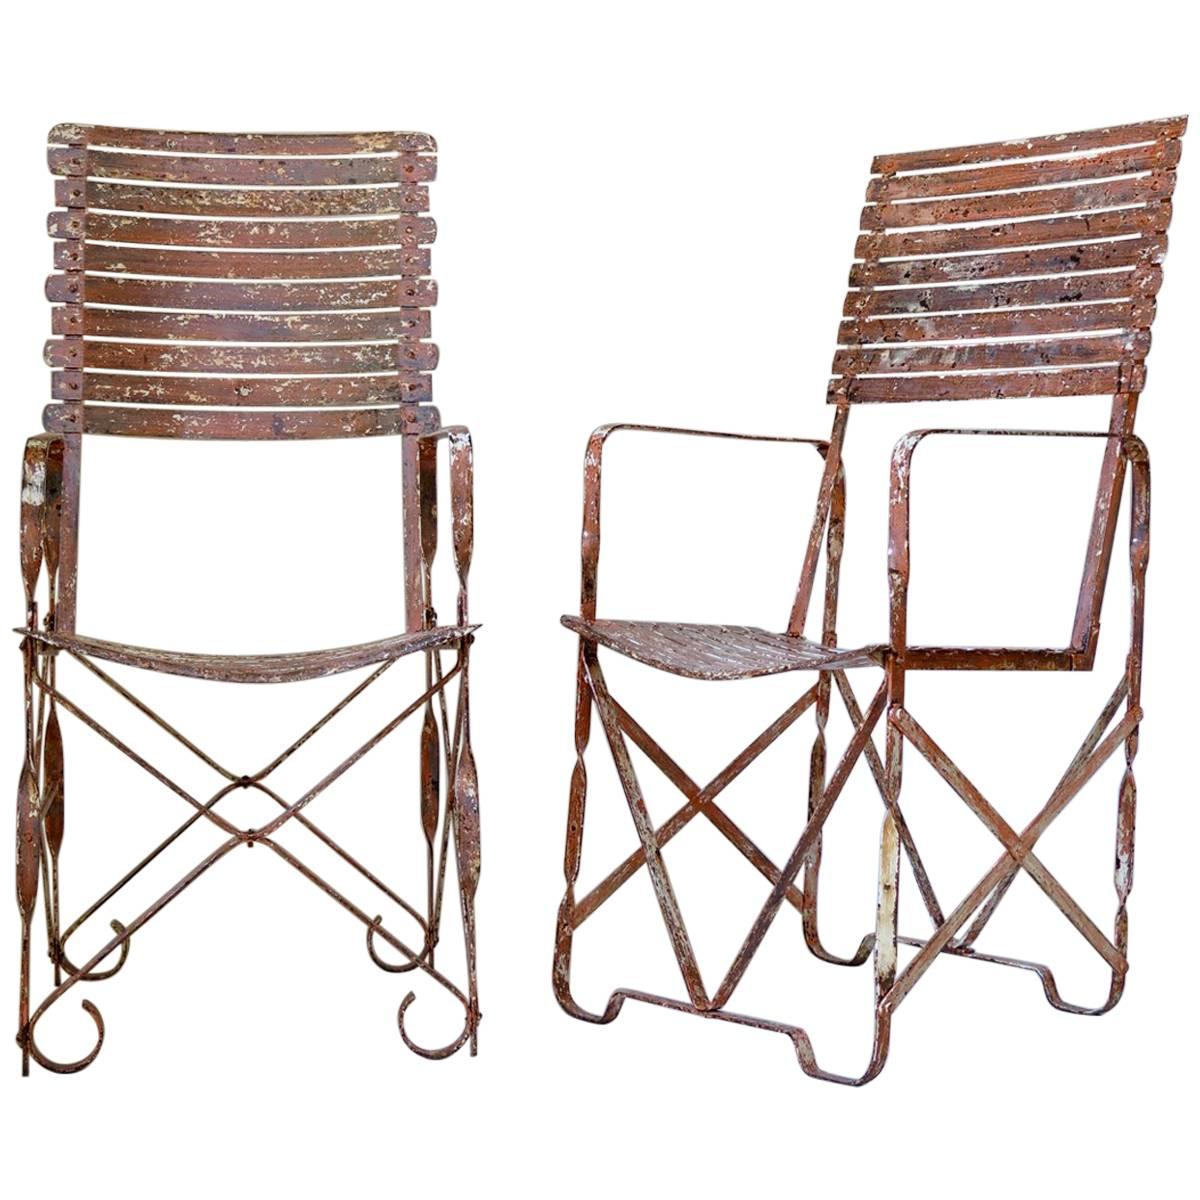 Rare Pair of Painted Iron Armchairs, France, circa 1910s